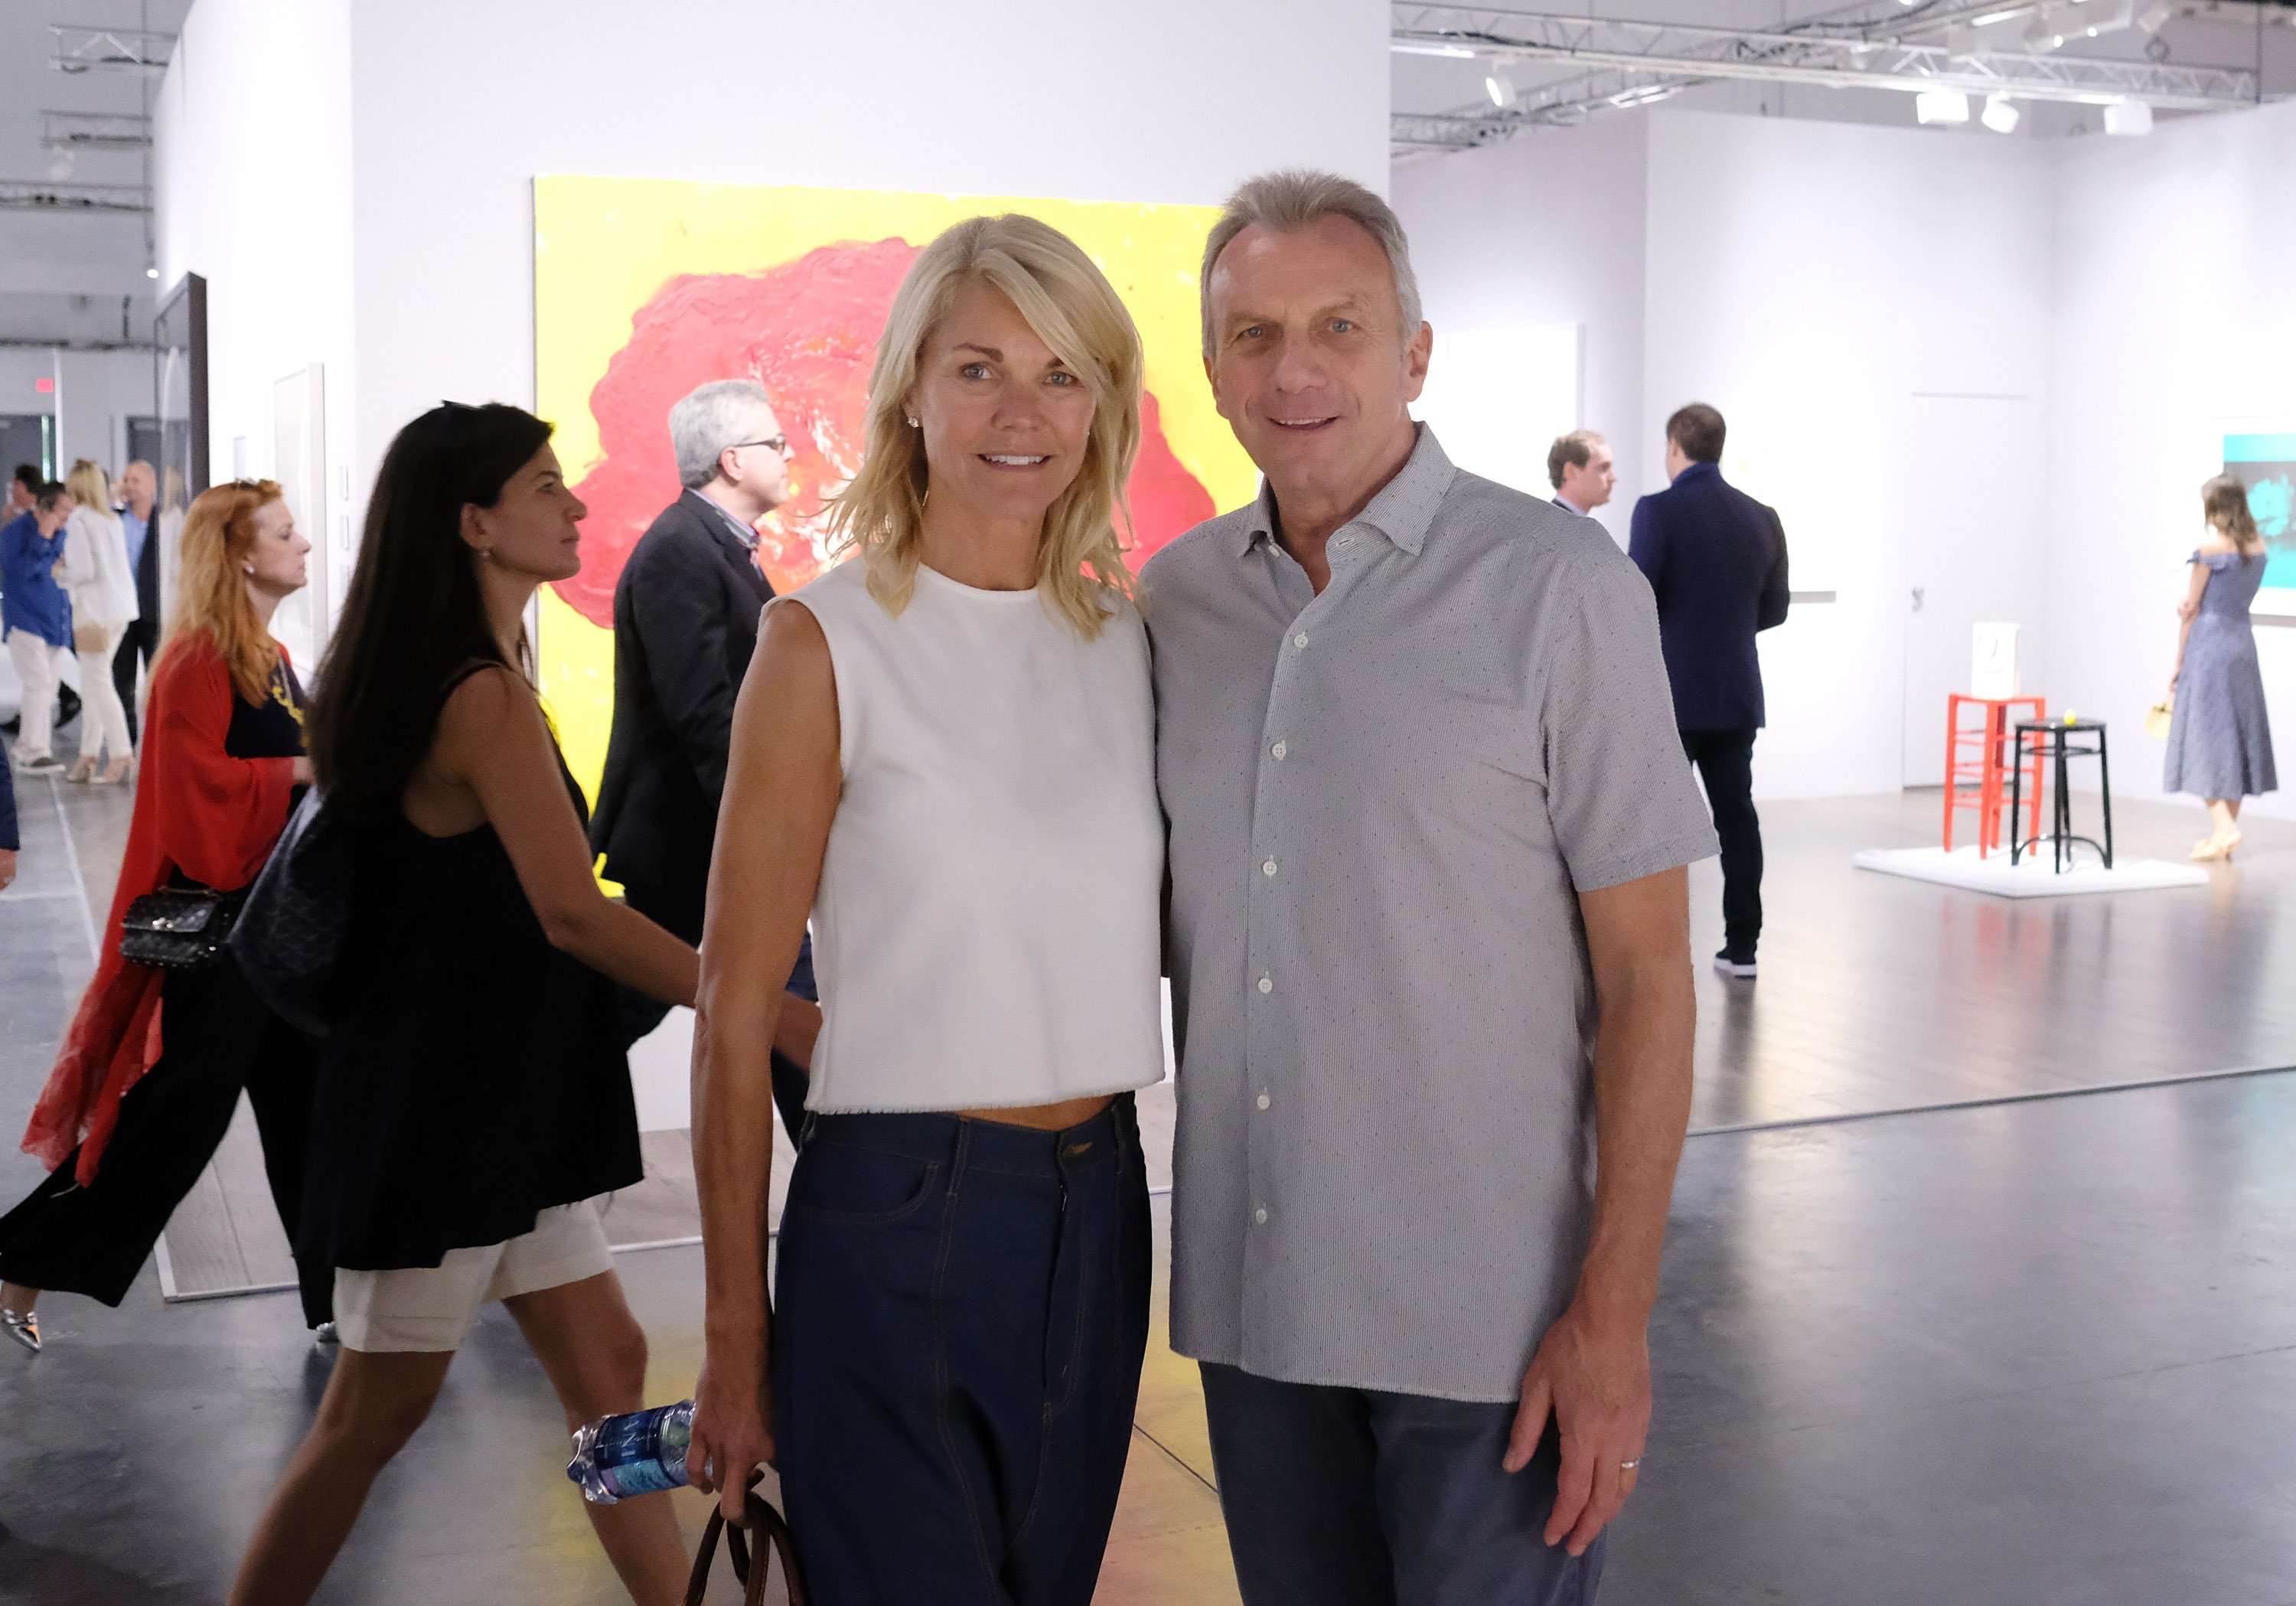 Joe and Jennifer Montana attending the Art Basel Miami Beach 2017 Media Reception & VIP Viewing in Miami | Source: Getty Images